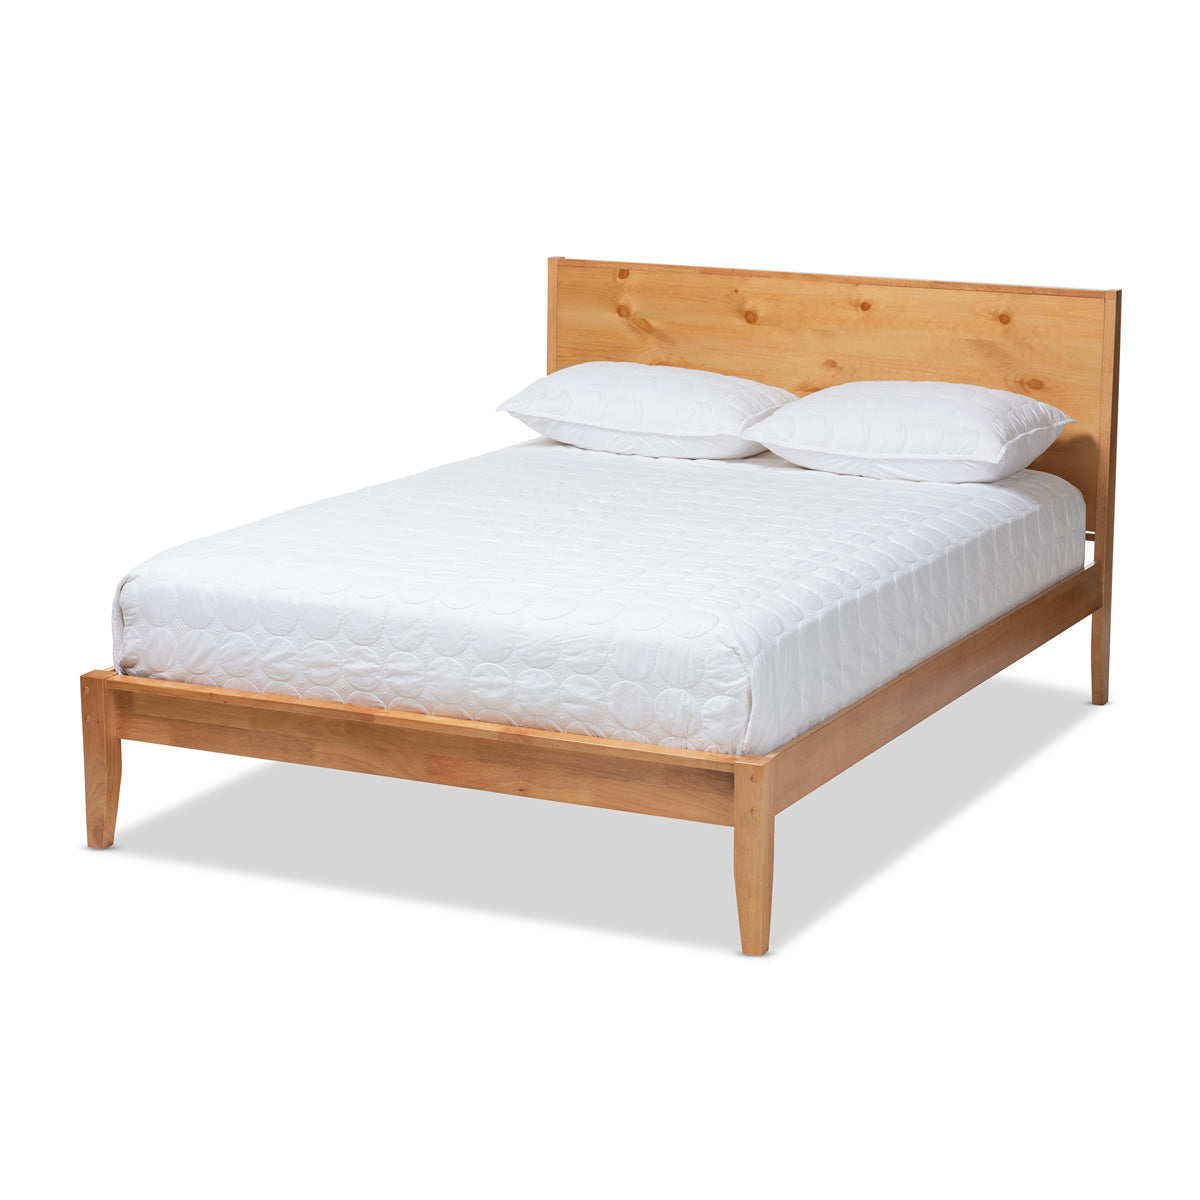 Baxton Studio Marana Modern and Rustic Natural Oak and Pine Finished Wood Queen Size Platform Bed Baxton Studio-beds-Minimal And Modern - 1